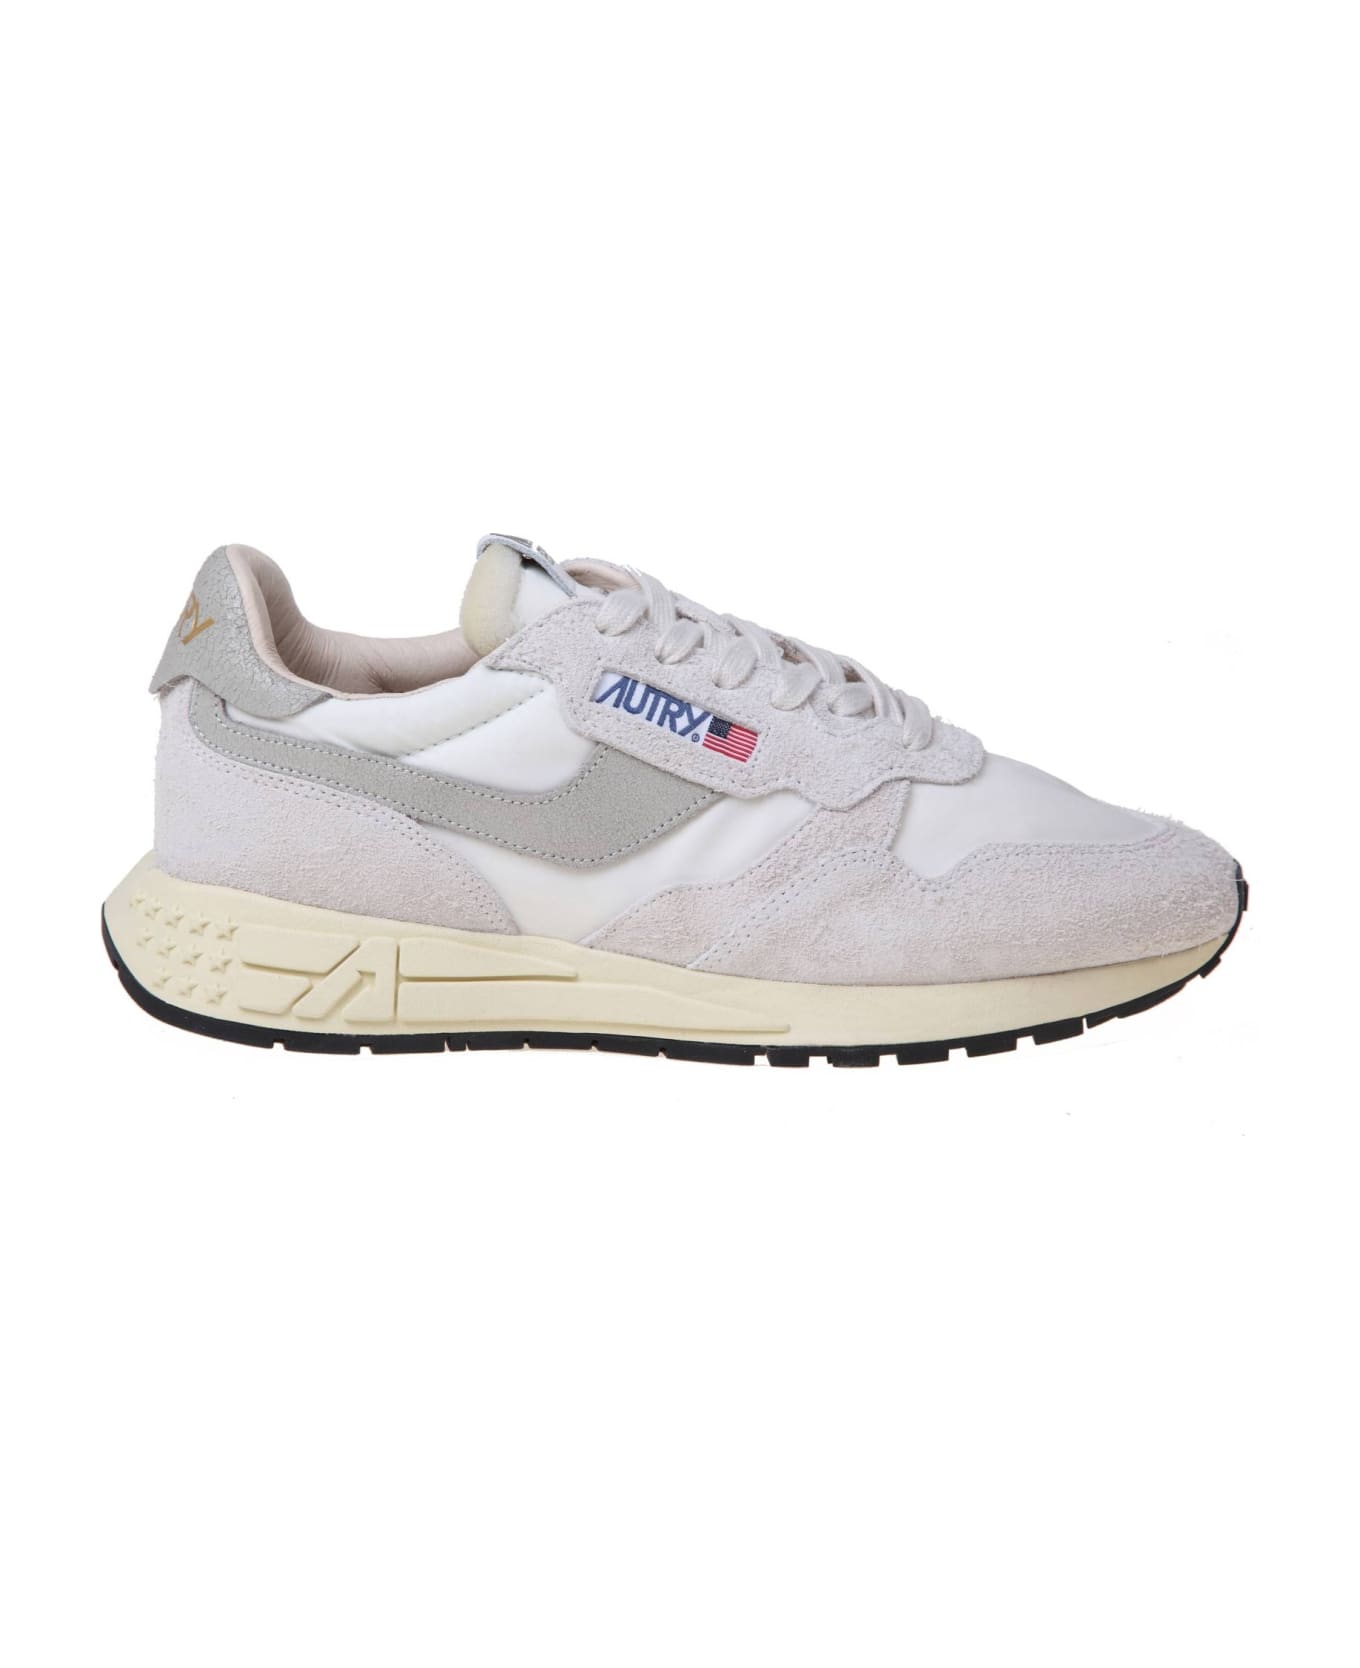 Autry Reelwind Low Sneakers - WHITE